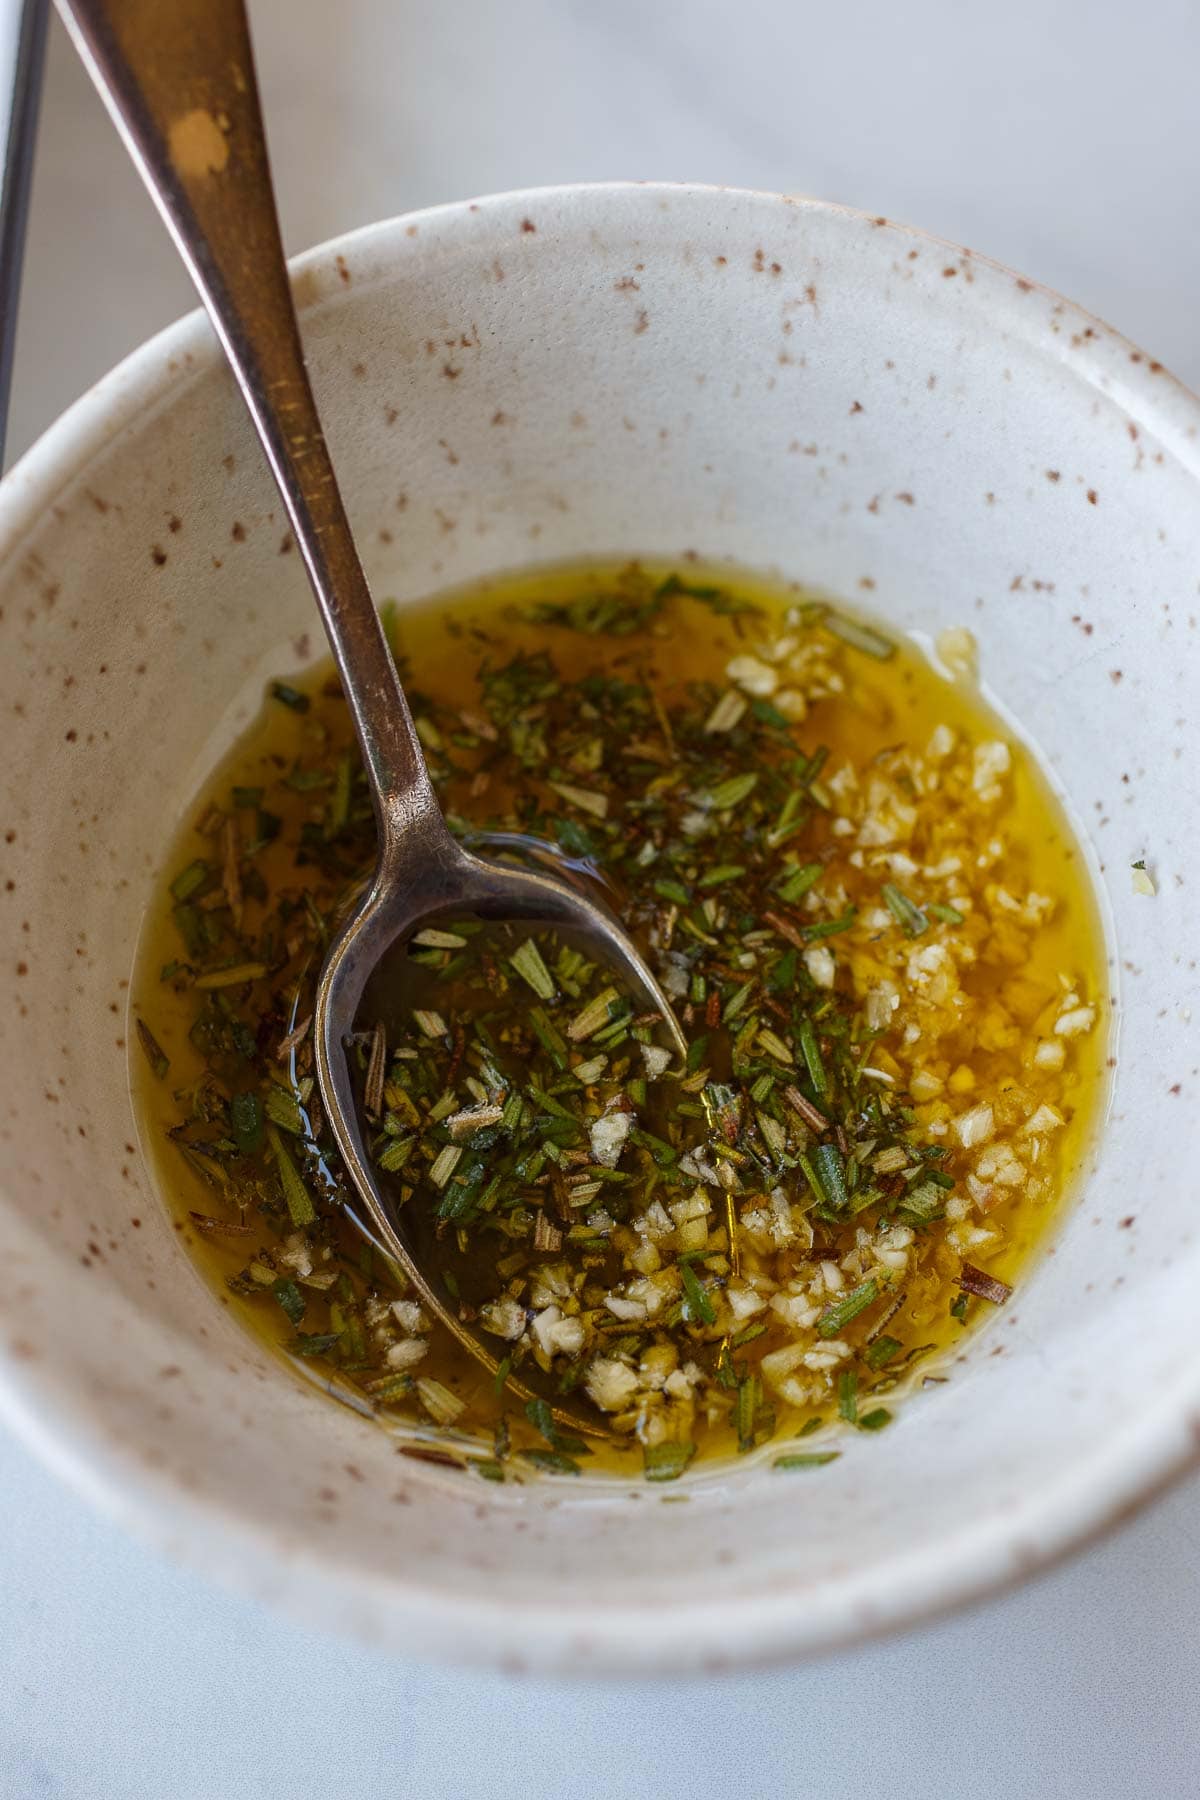 oil, rosemary, and garlic in small bowl with spoon.